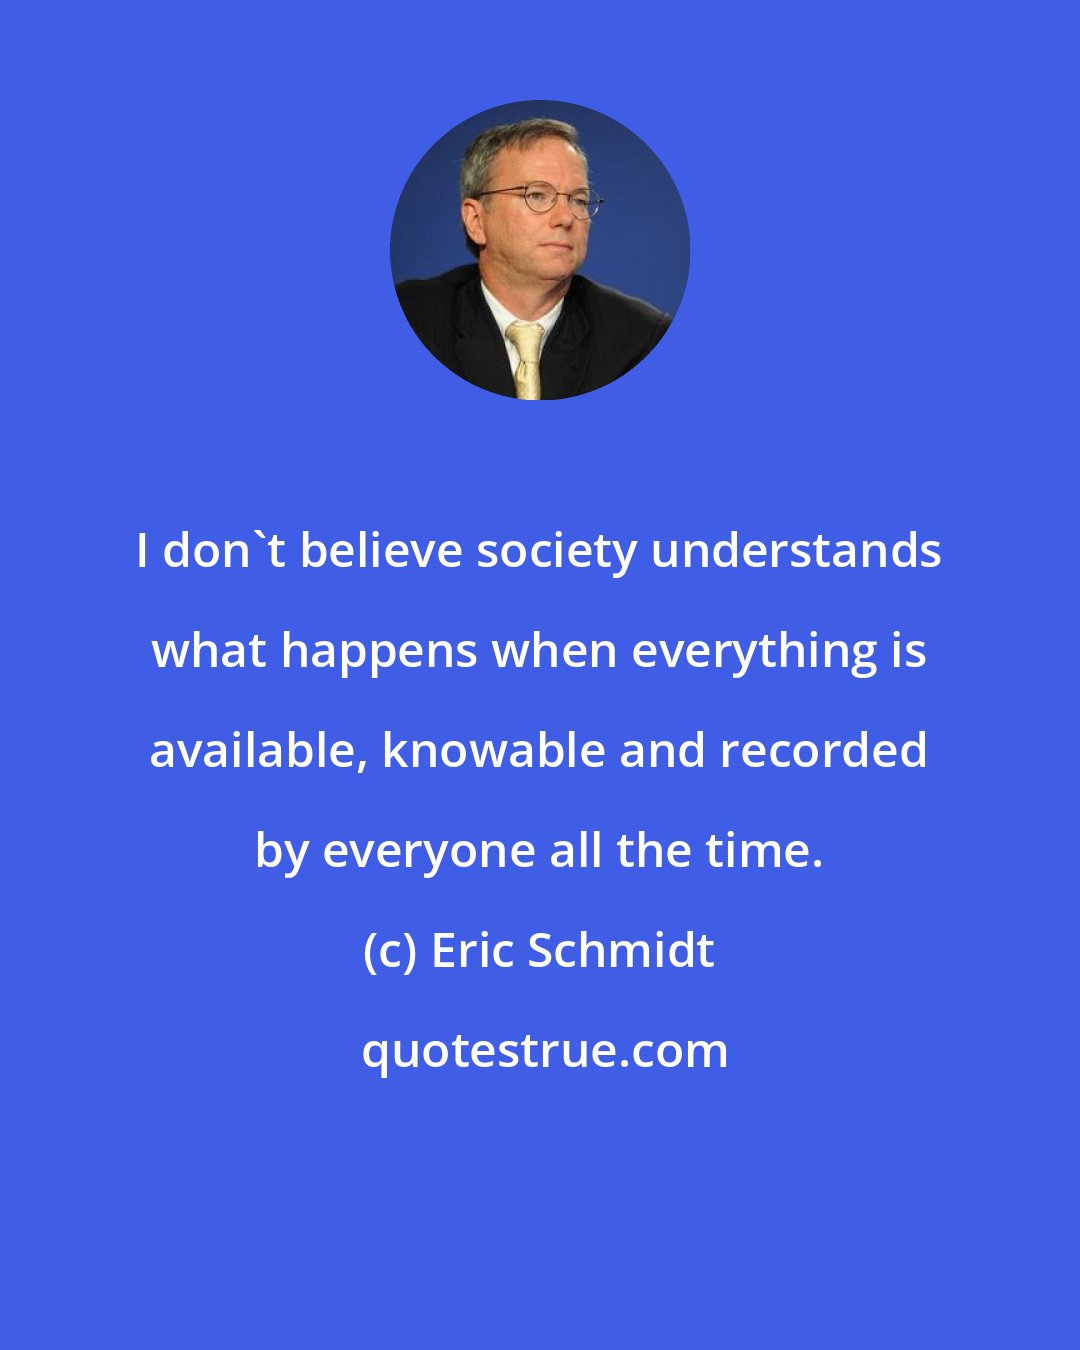 Eric Schmidt: I don't believe society understands what happens when everything is available, knowable and recorded by everyone all the time.